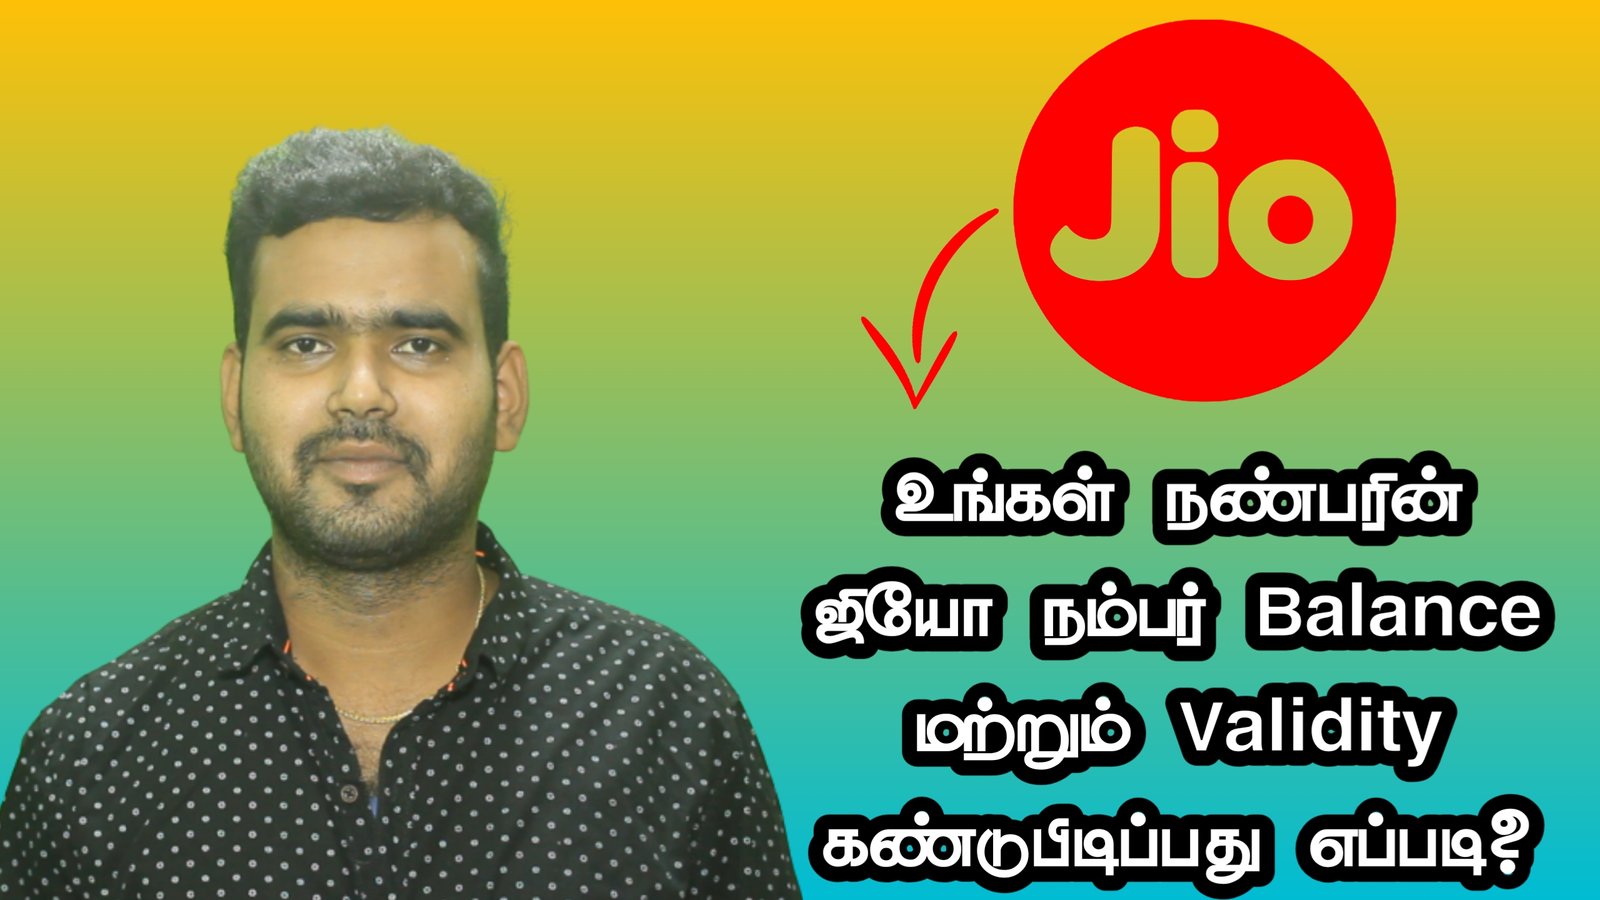 How To Check Any Jio Numbers Data Balance, Validity | Trick To Get Anyone’s Jio Details